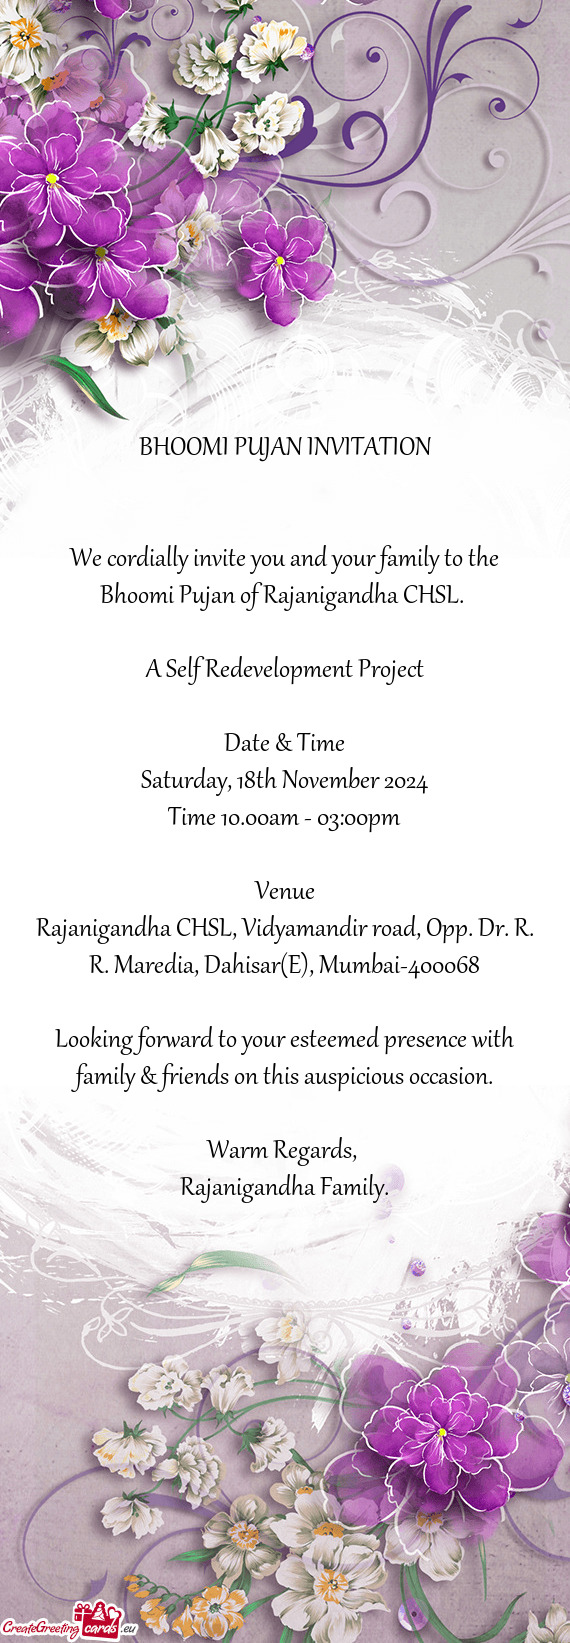 We cordially invite you and your family to the Bhoomi Pujan of Rajanigandha CHSL